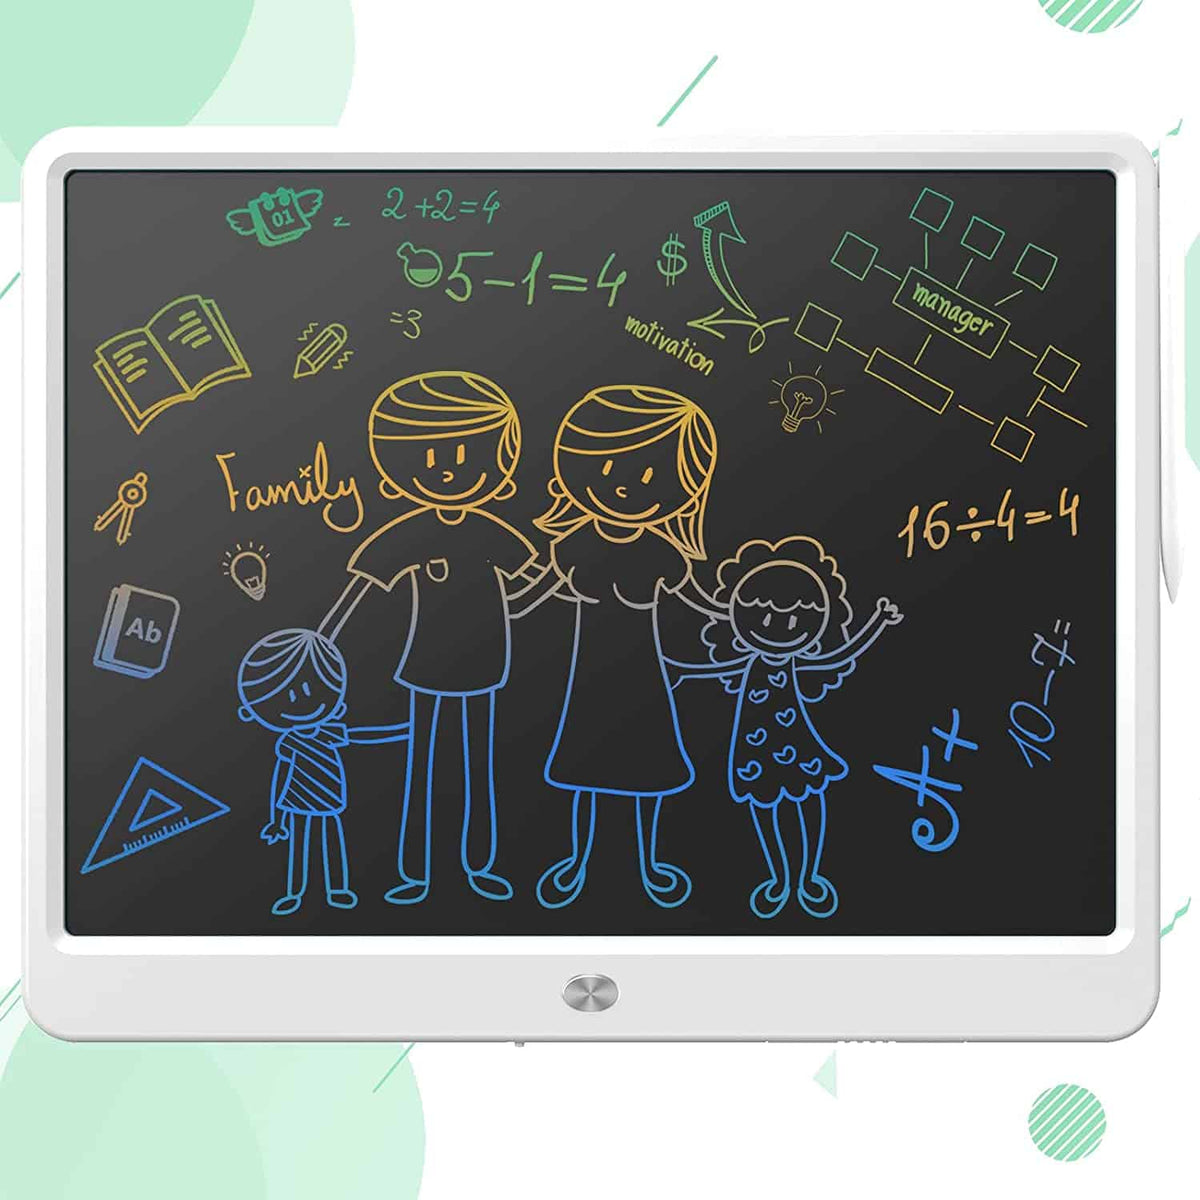 16 Pieces LCD Writing Tablet Doodle Pad for Kids 8.5 Inch LCD